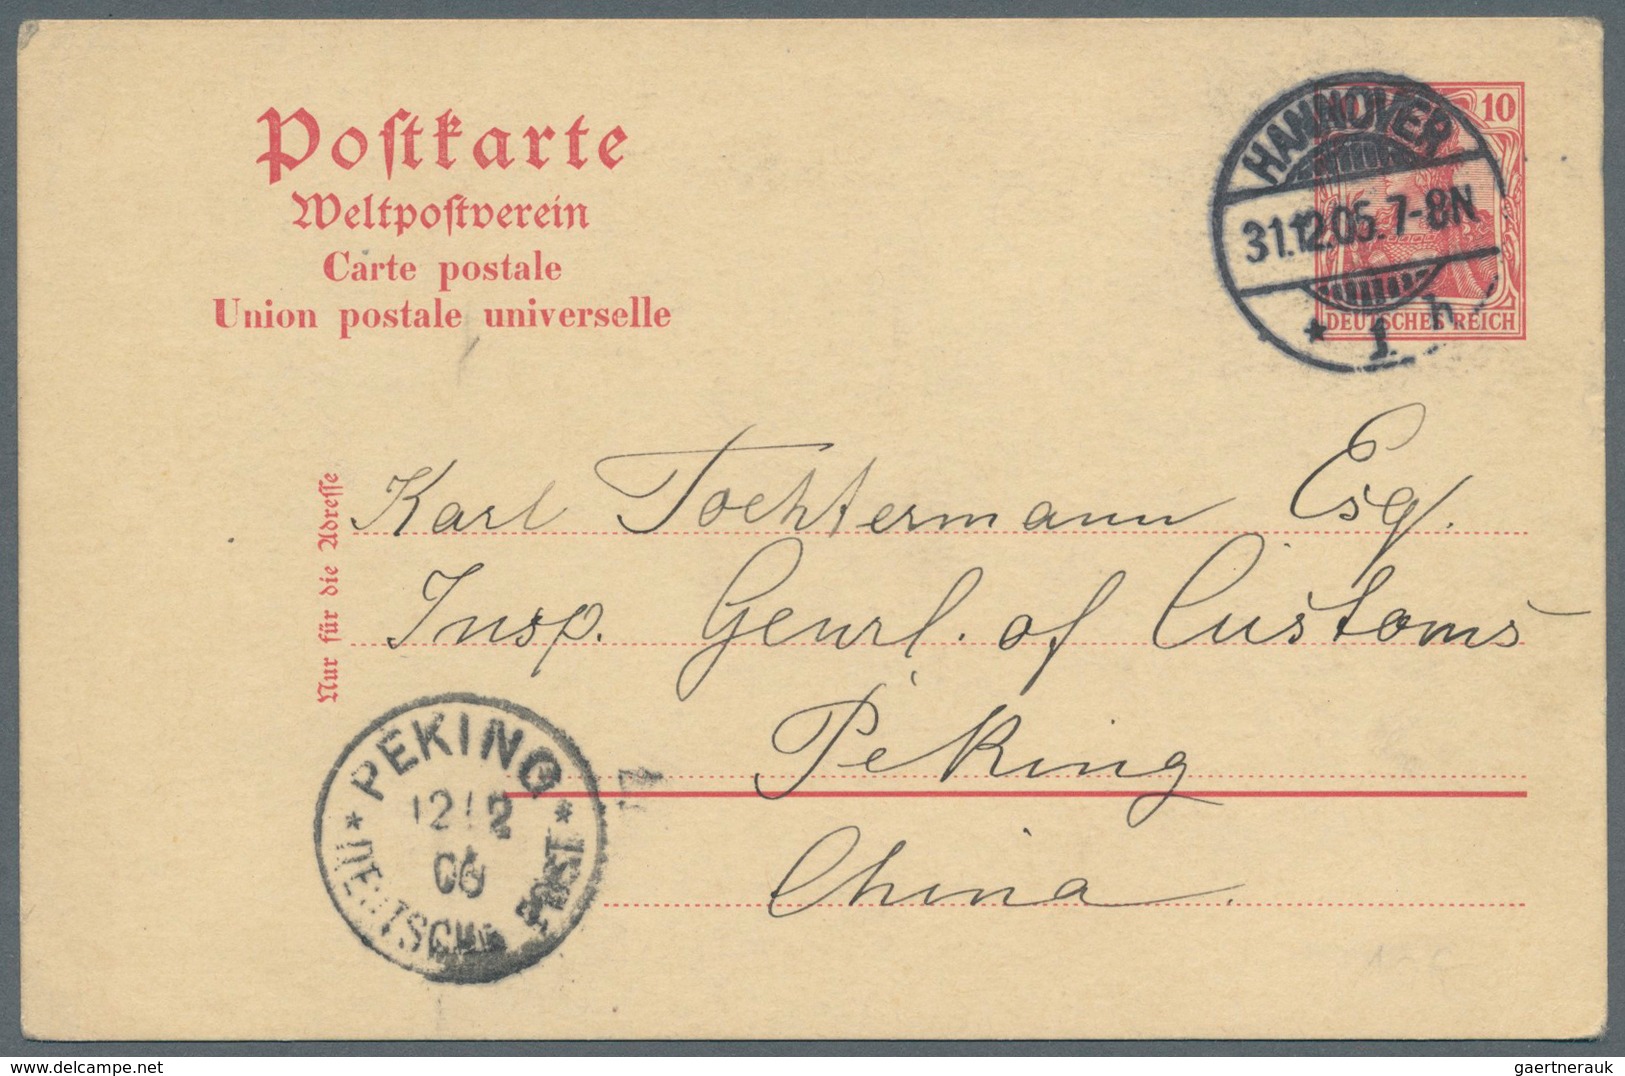 China - Incoming Mail: 1899/1906, Germany, correspondence of UPU cards (5, from Hannover and area) t